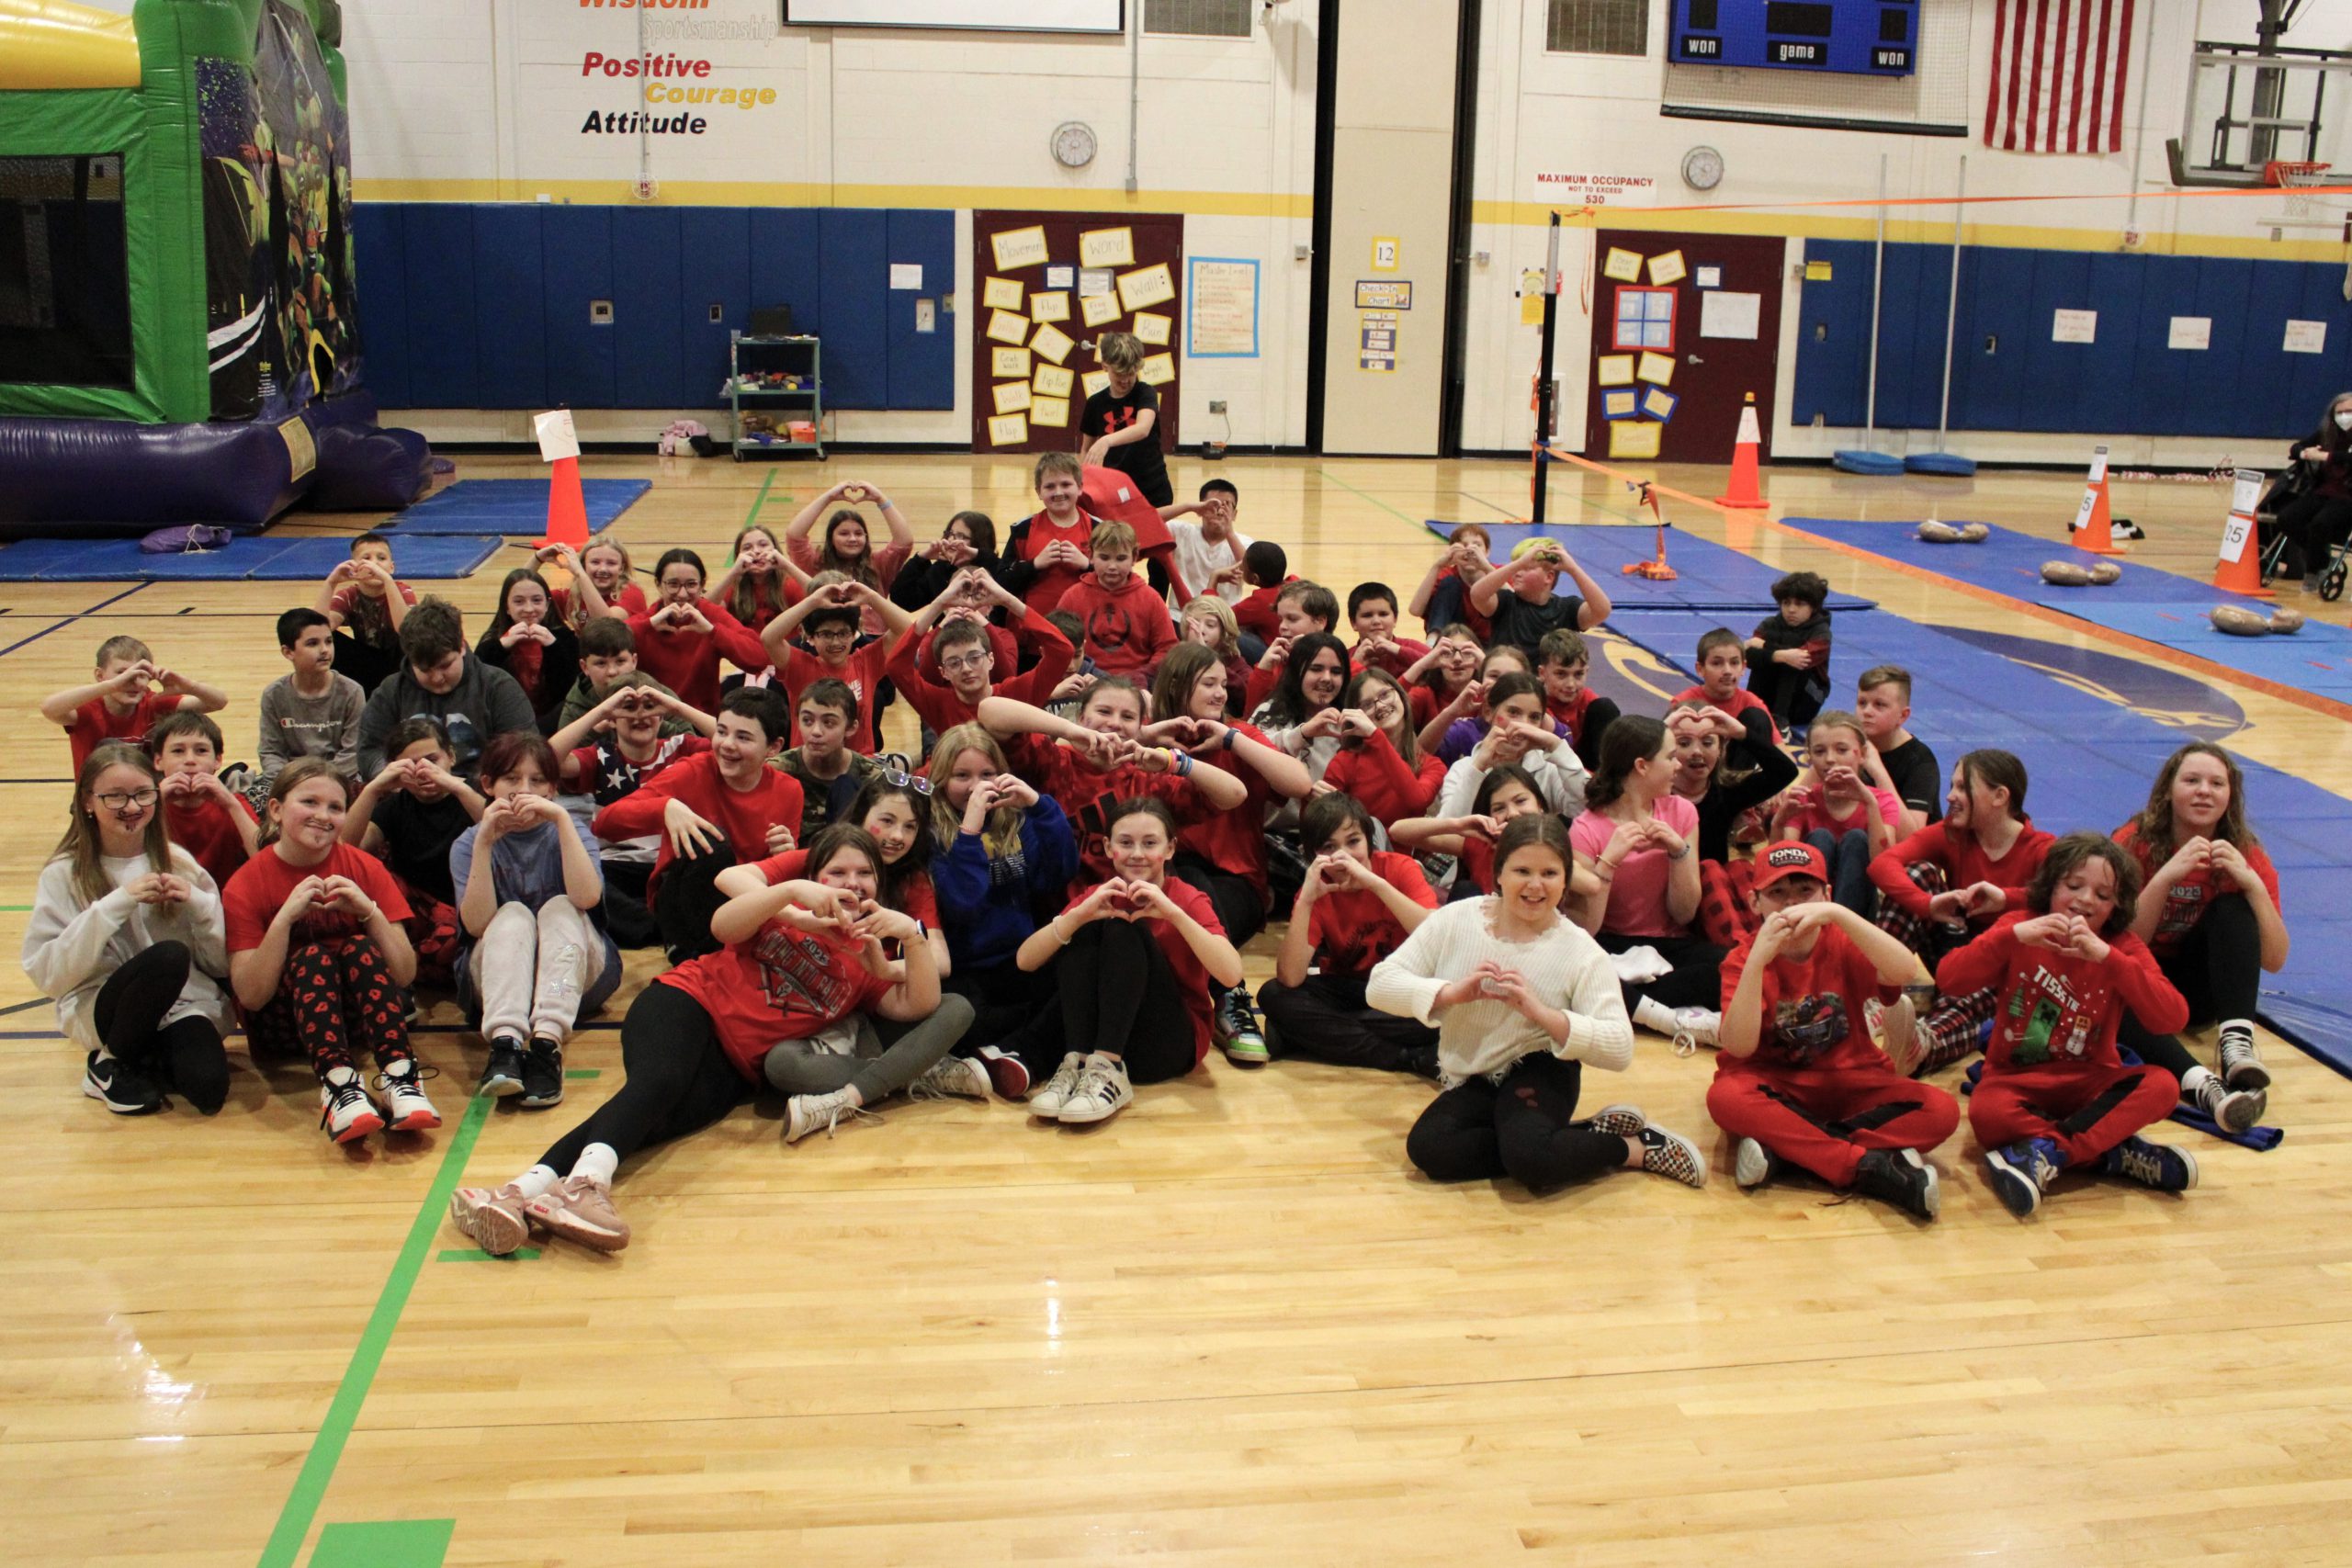 a large group of students wearing red sit on a gym floor and make heart symbols with their hands